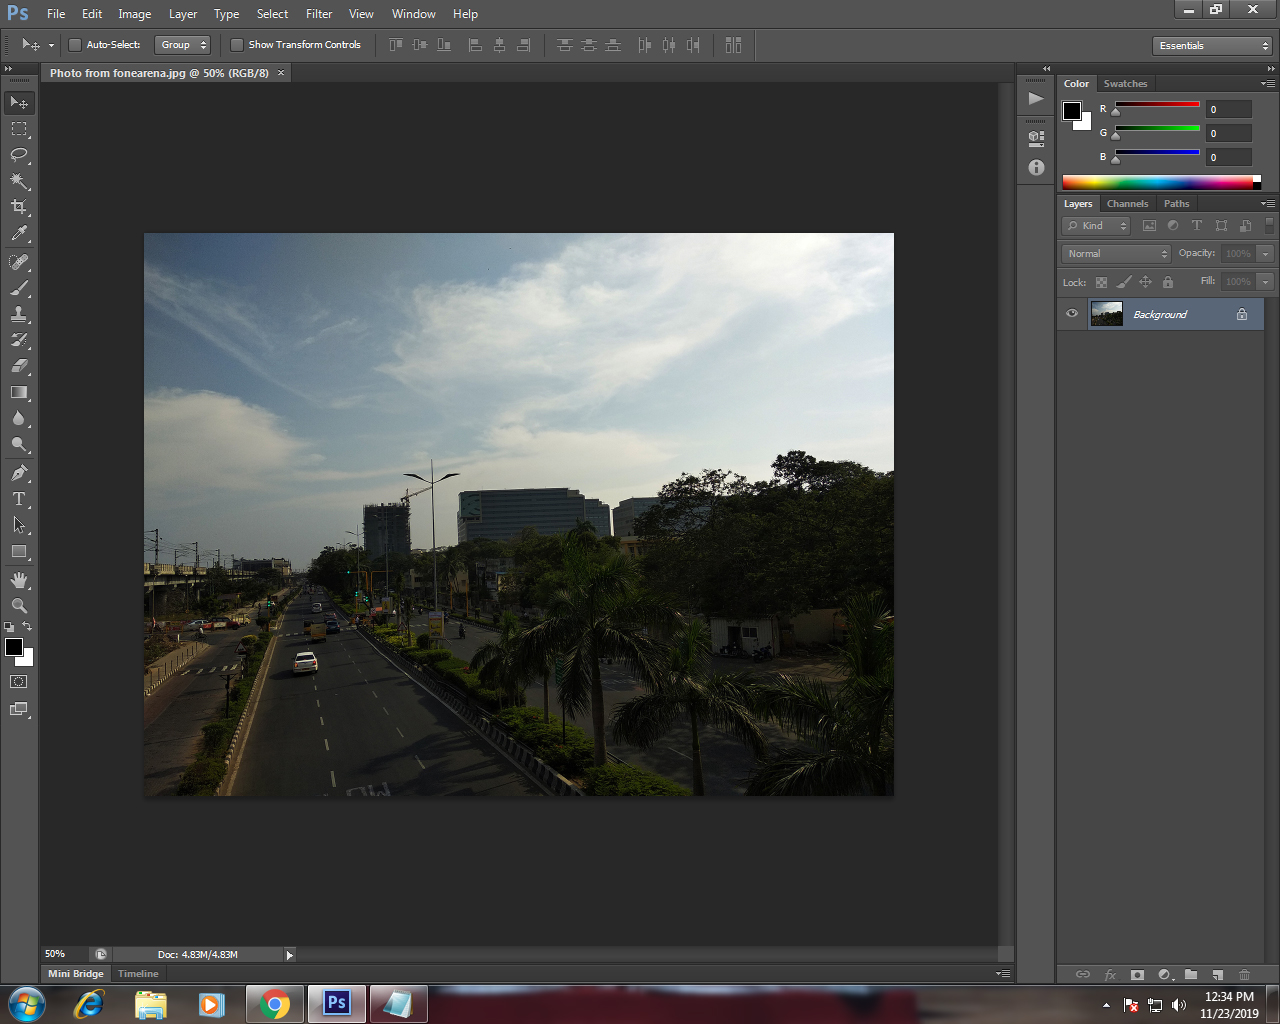 Opening photo in photoshop